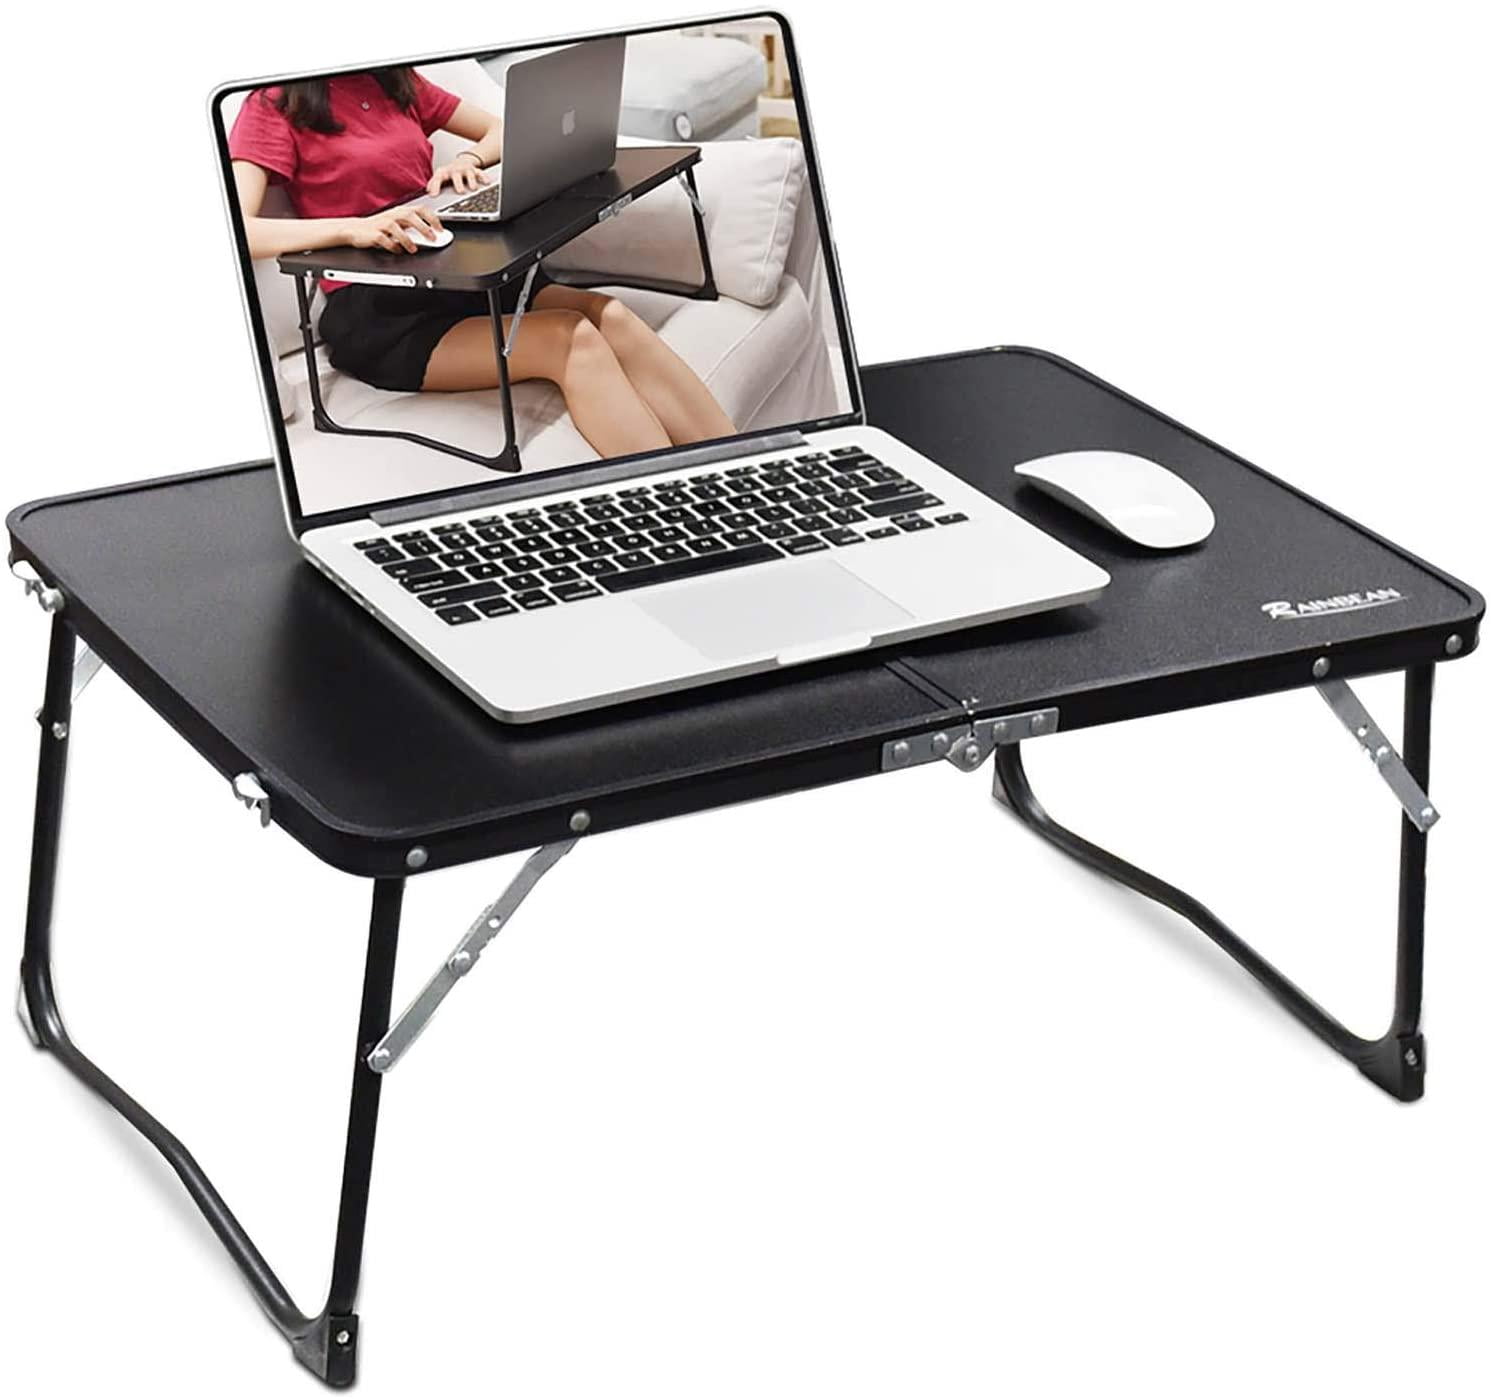 Breakfast Serving Tray Laptop Bed Desk Sturdy Portable Reading Table Notebook Stand Bed Tray with Cup Slot 